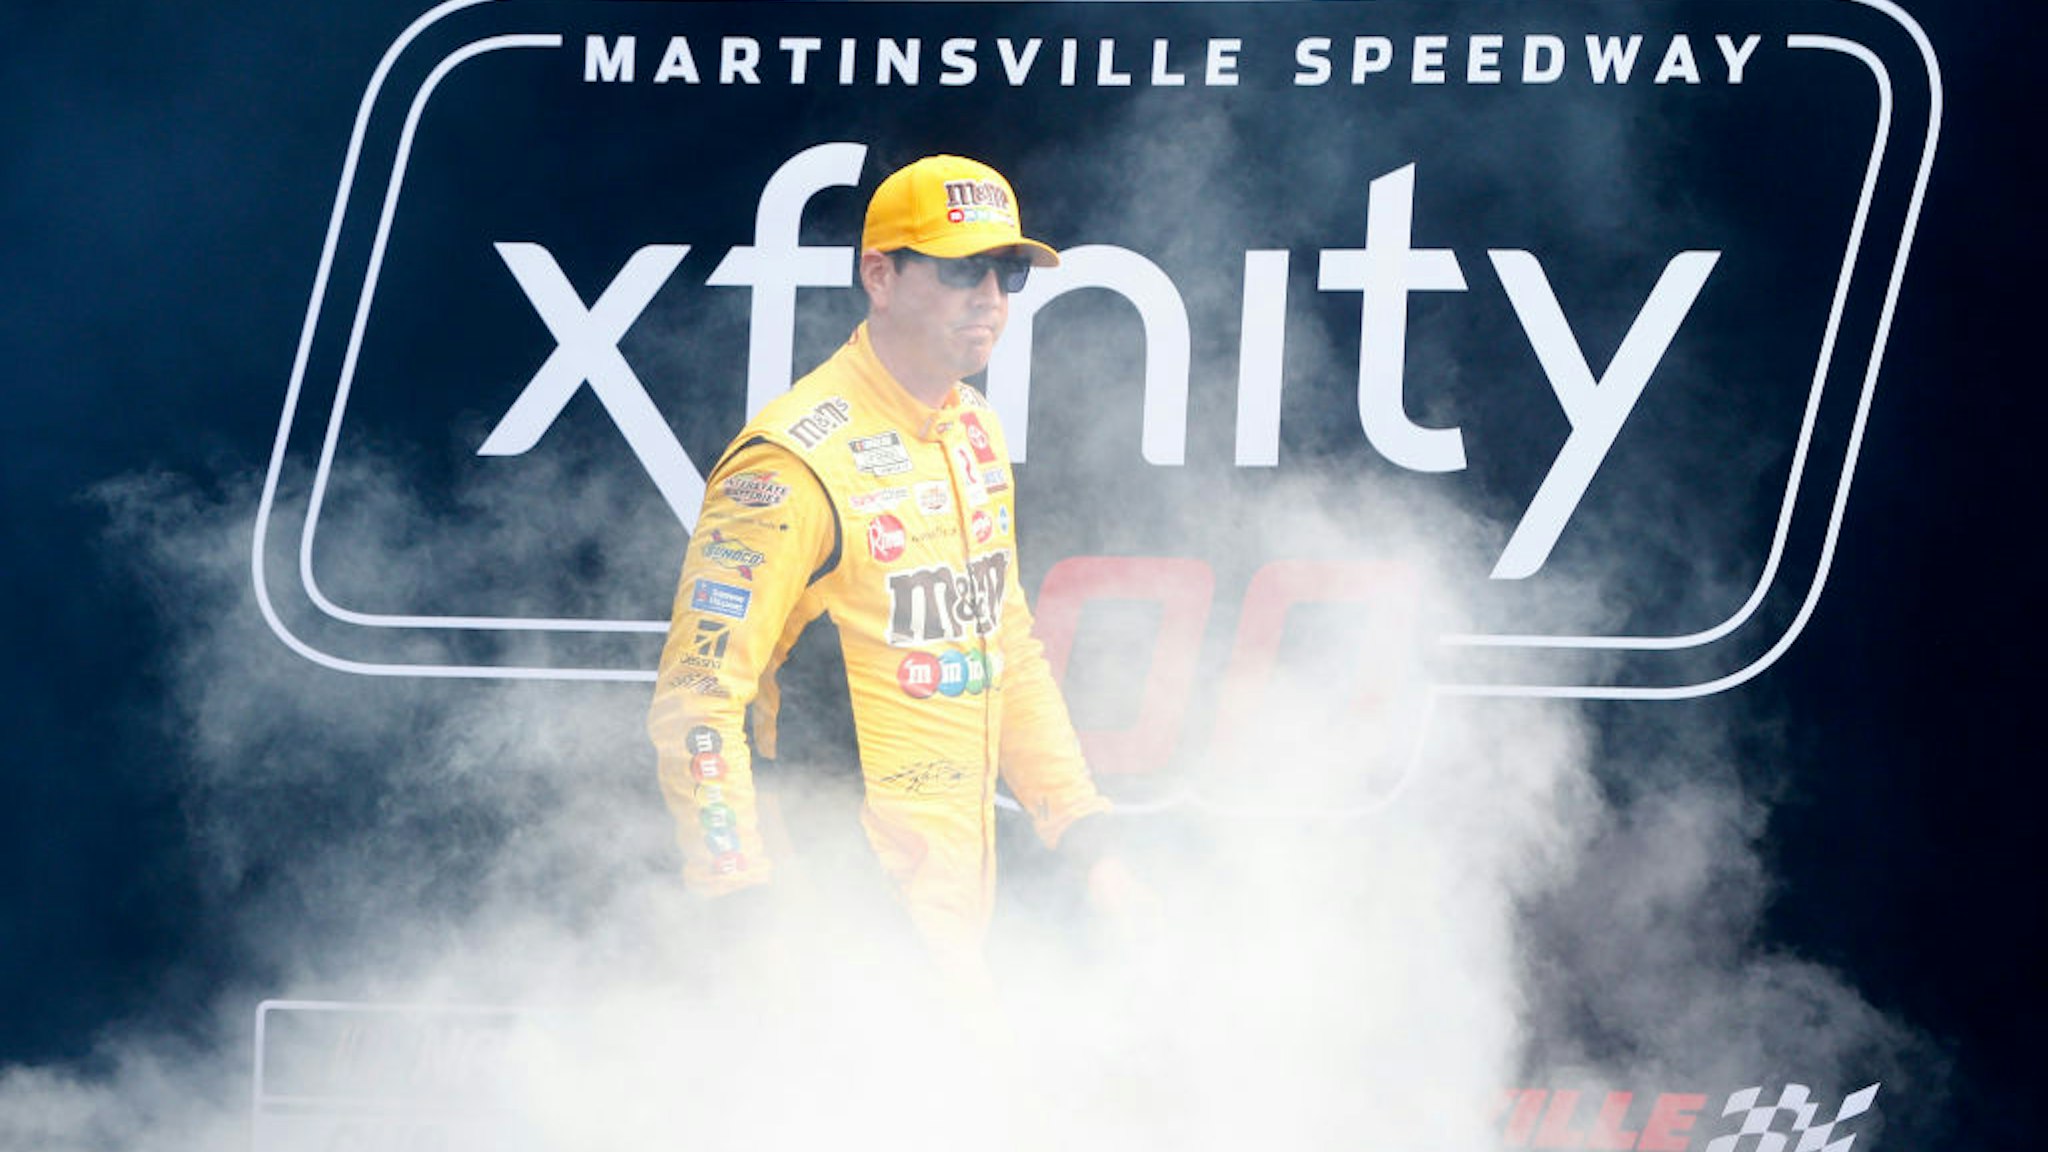 MARTINSVILLE, VIRGINIA - OCTOBER 31: Kyle Busch, driver of the #18 M&amp;M's Halloween Toyota, walks onstage during pre-race ceremonies prior to the NASCAR Cup Series Xfinity 500 at Martinsville Speedway on October 31, 2021 in Martinsville, Virginia. (Photo by Brian Lawdermilk/Getty Images)